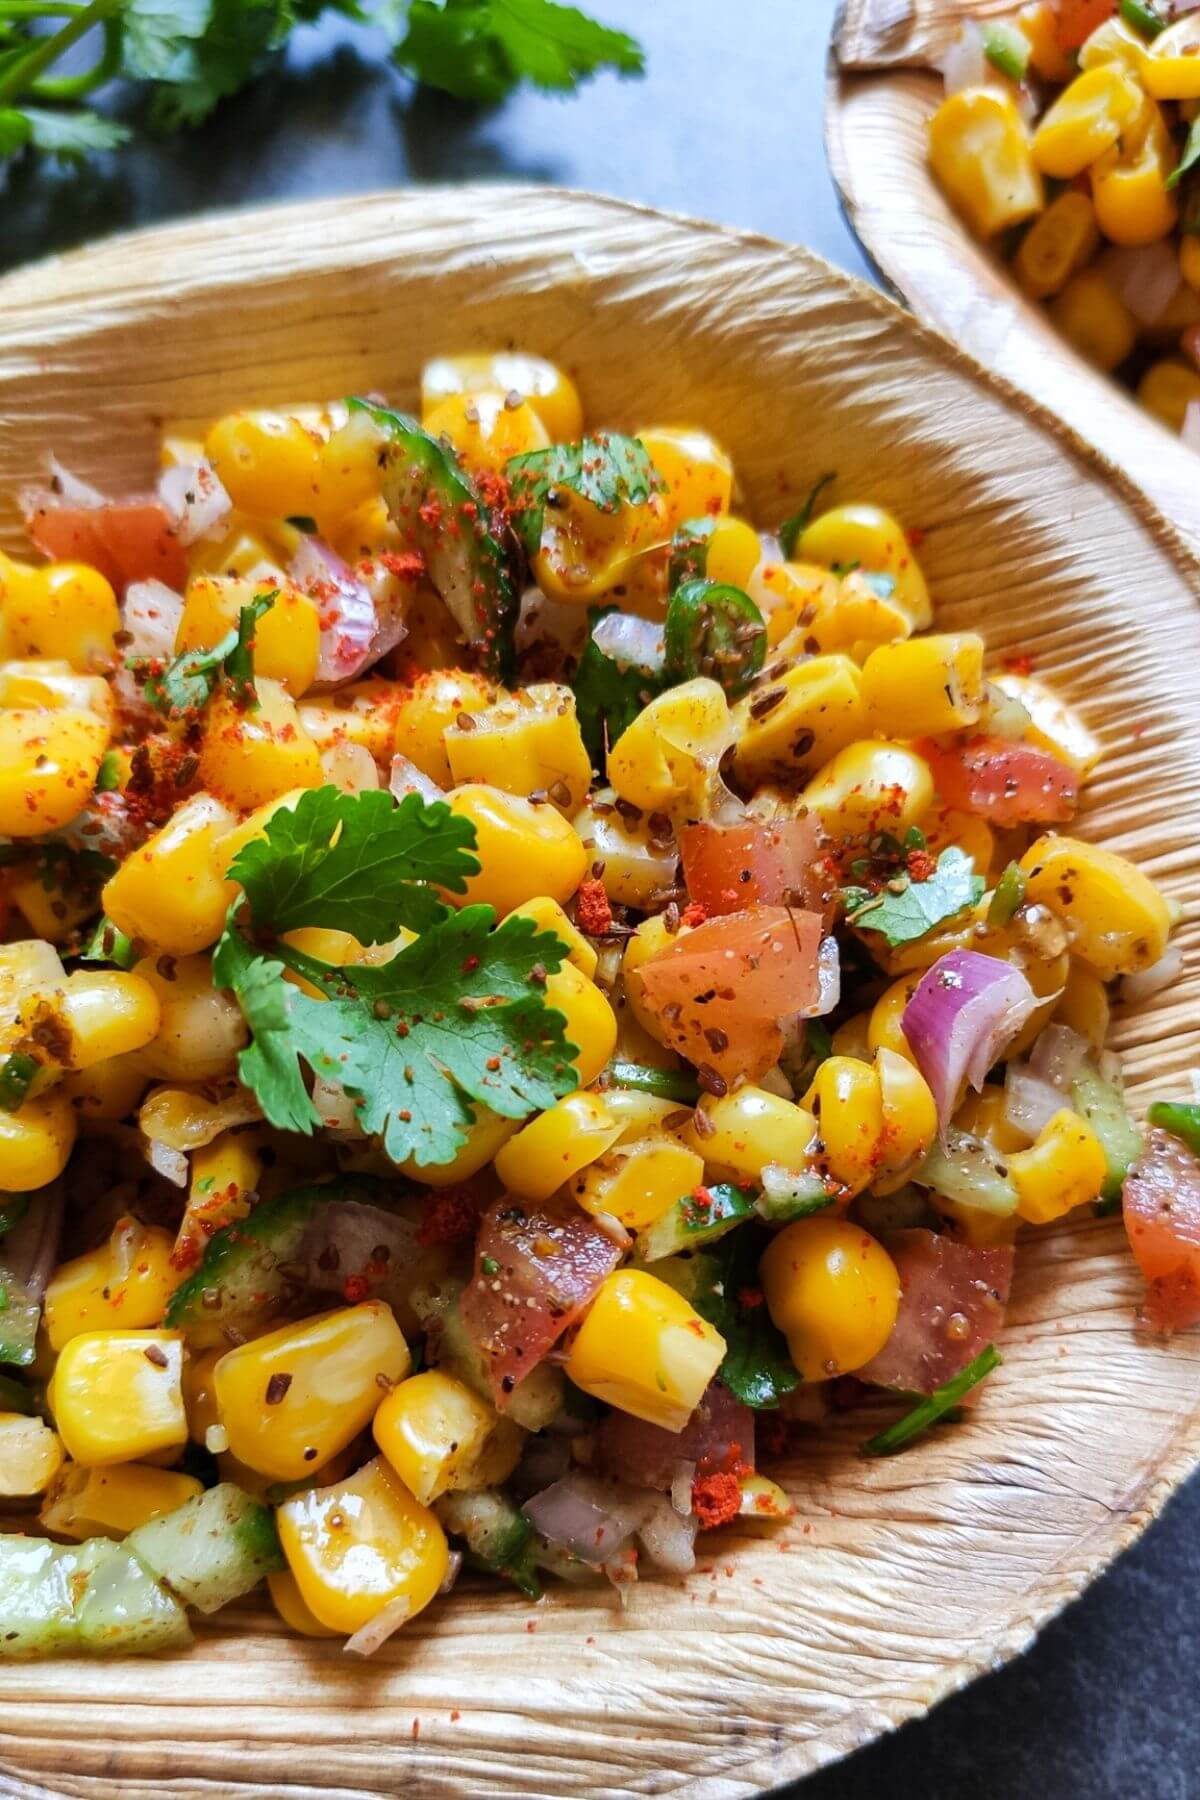 Masala corn served in a small wooden bowl.